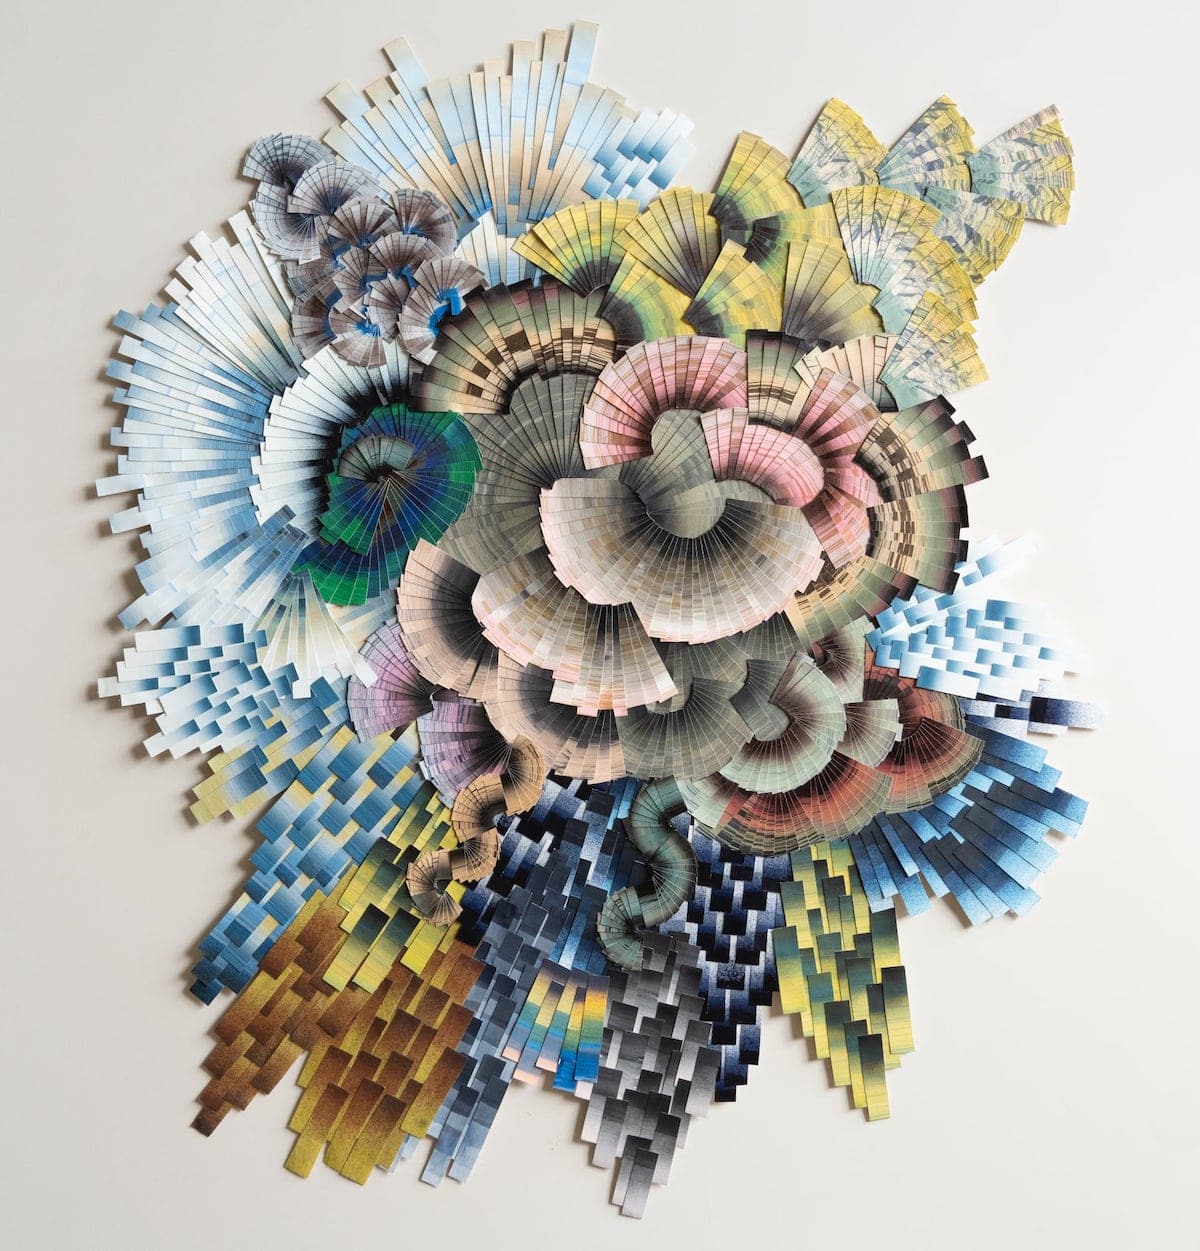 Paper Sculptures by Lyndi Sales